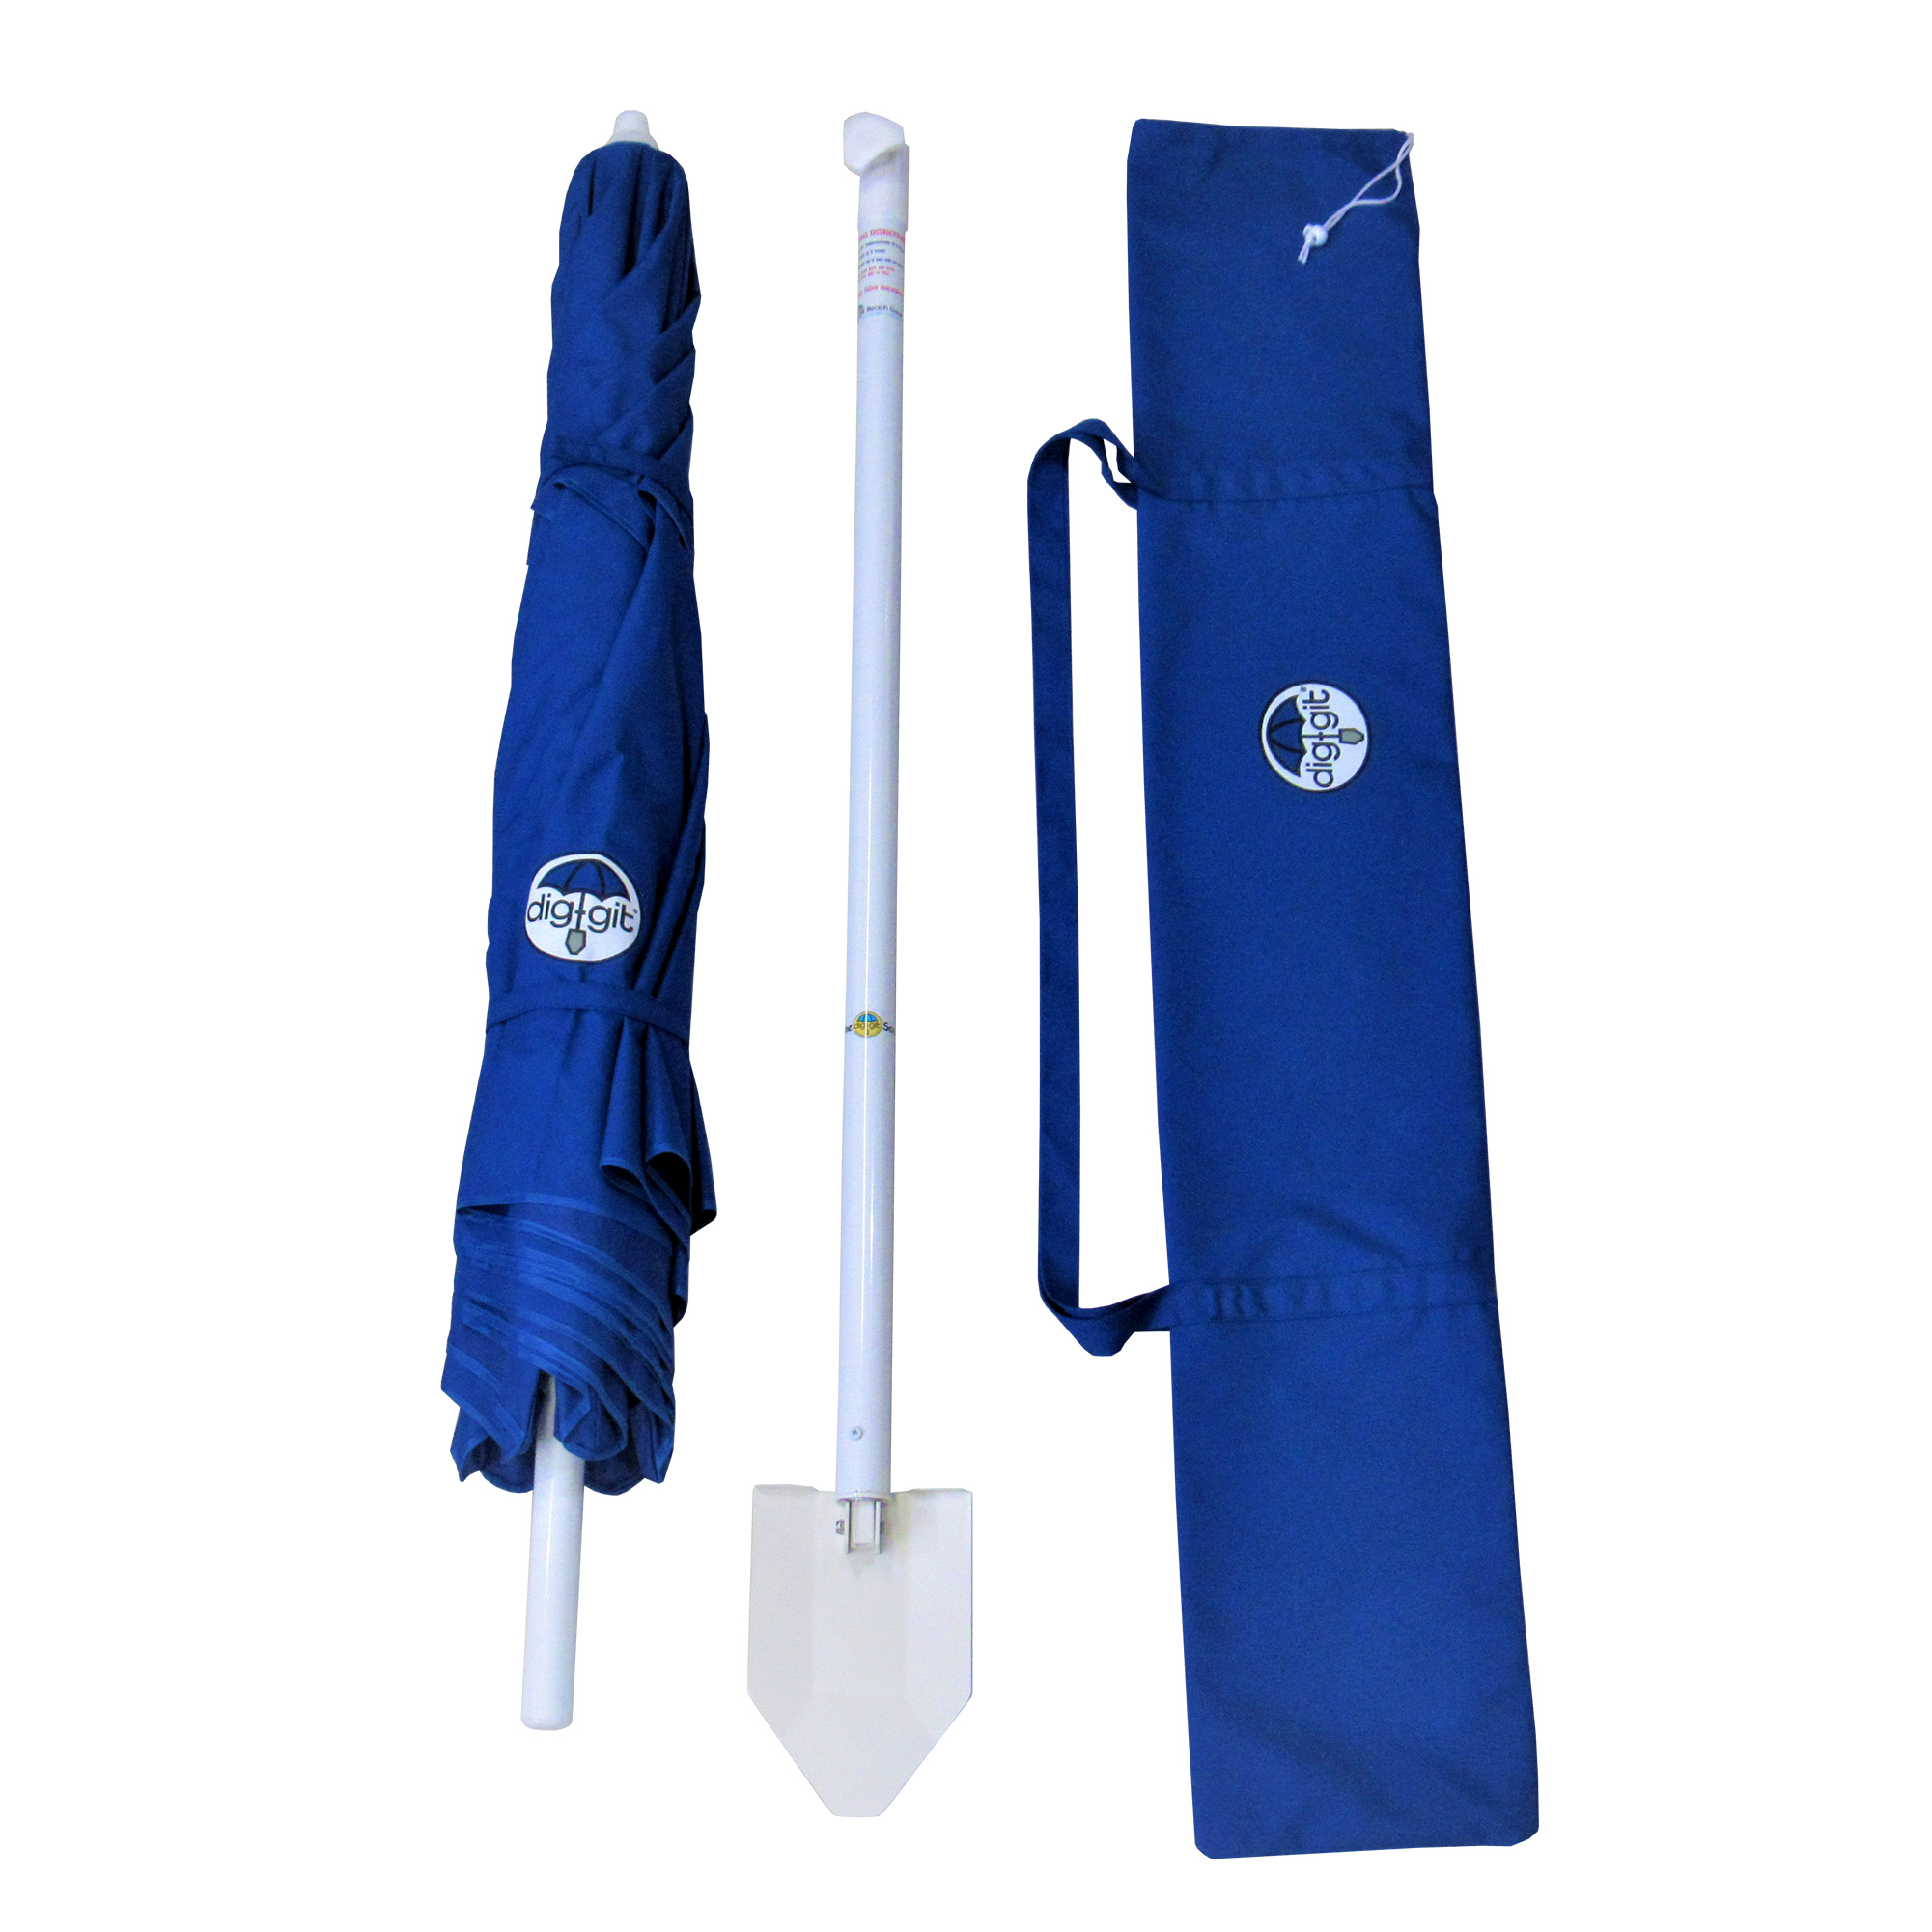 dig-git Beach Umbrella wind resistant, Royal blue vented with shovel sand anchor - image 3 of 6